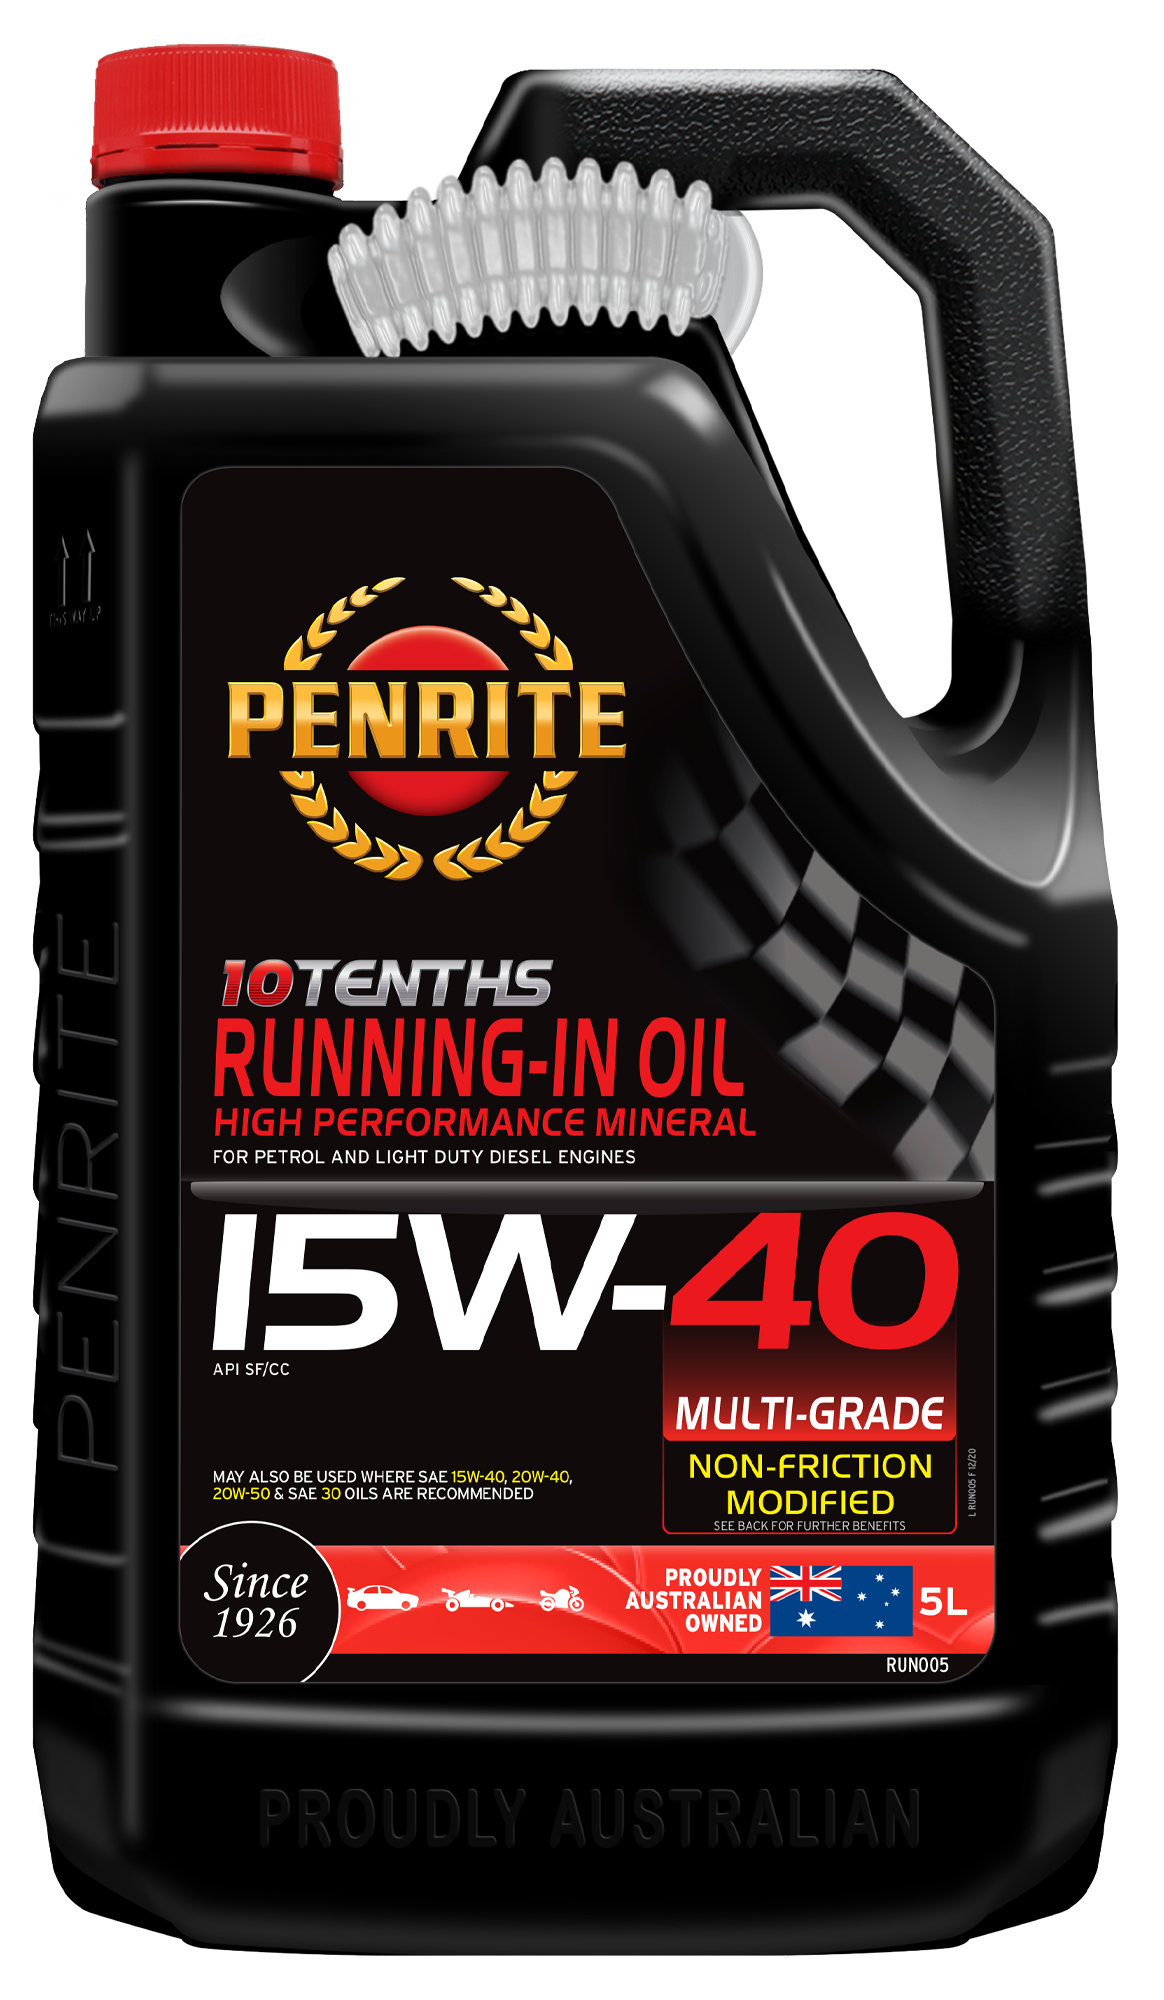 10 Tenths Running-in Oil 15W-40 (Mineral) 5L - Penrite 4 X 5 Litre (Carton Only) | Universal Auto Spares